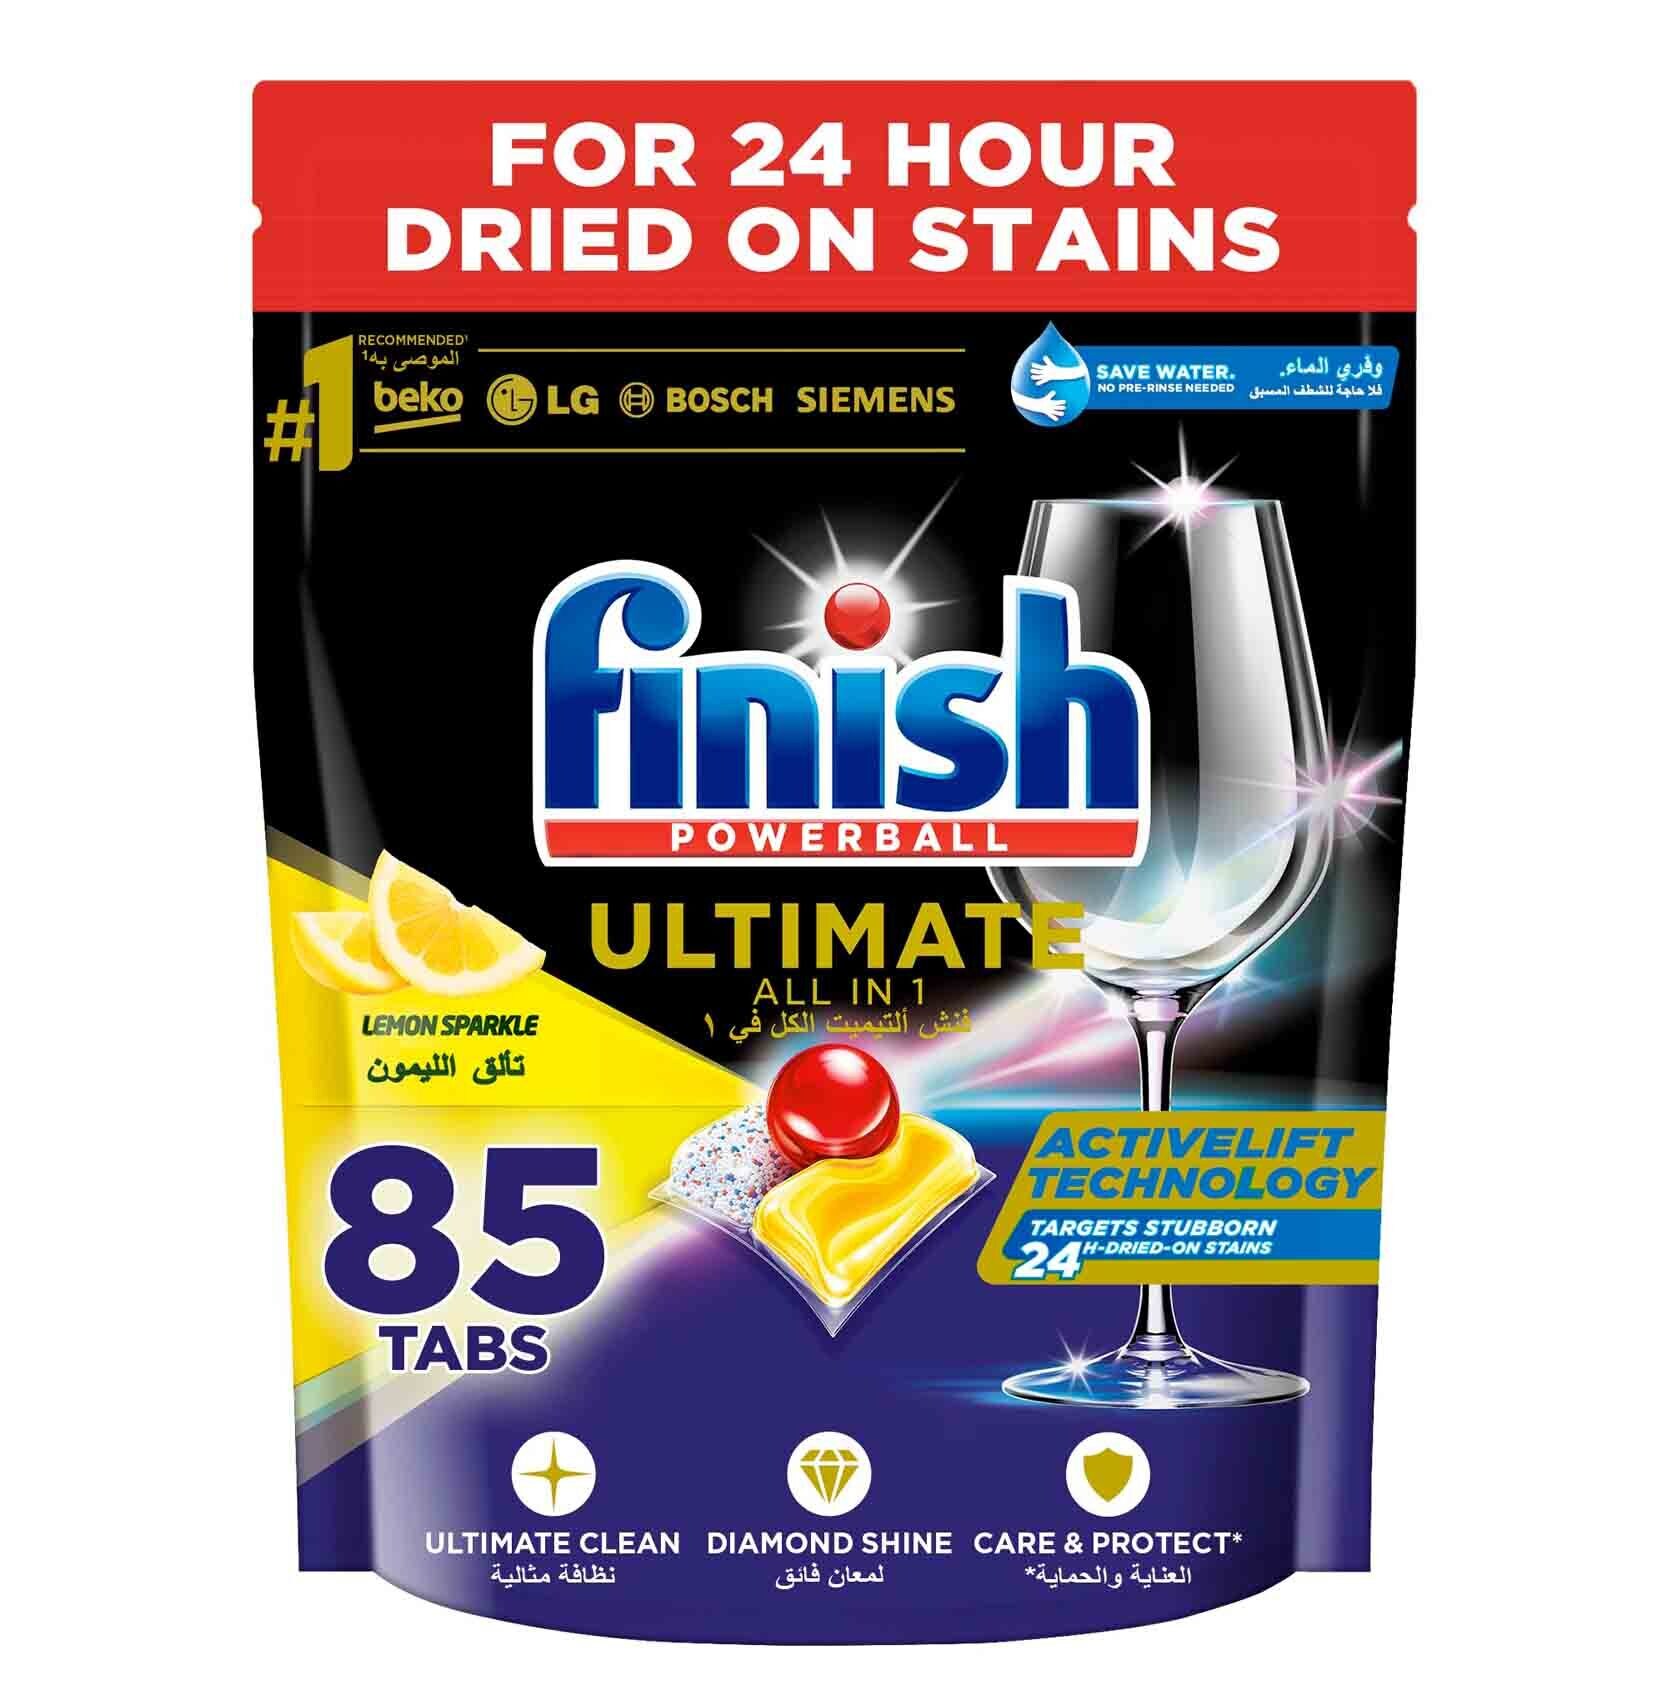 Finish Powerball Ultimate Automatic Dishwasher Detergent, 28 count, 11.3 oz